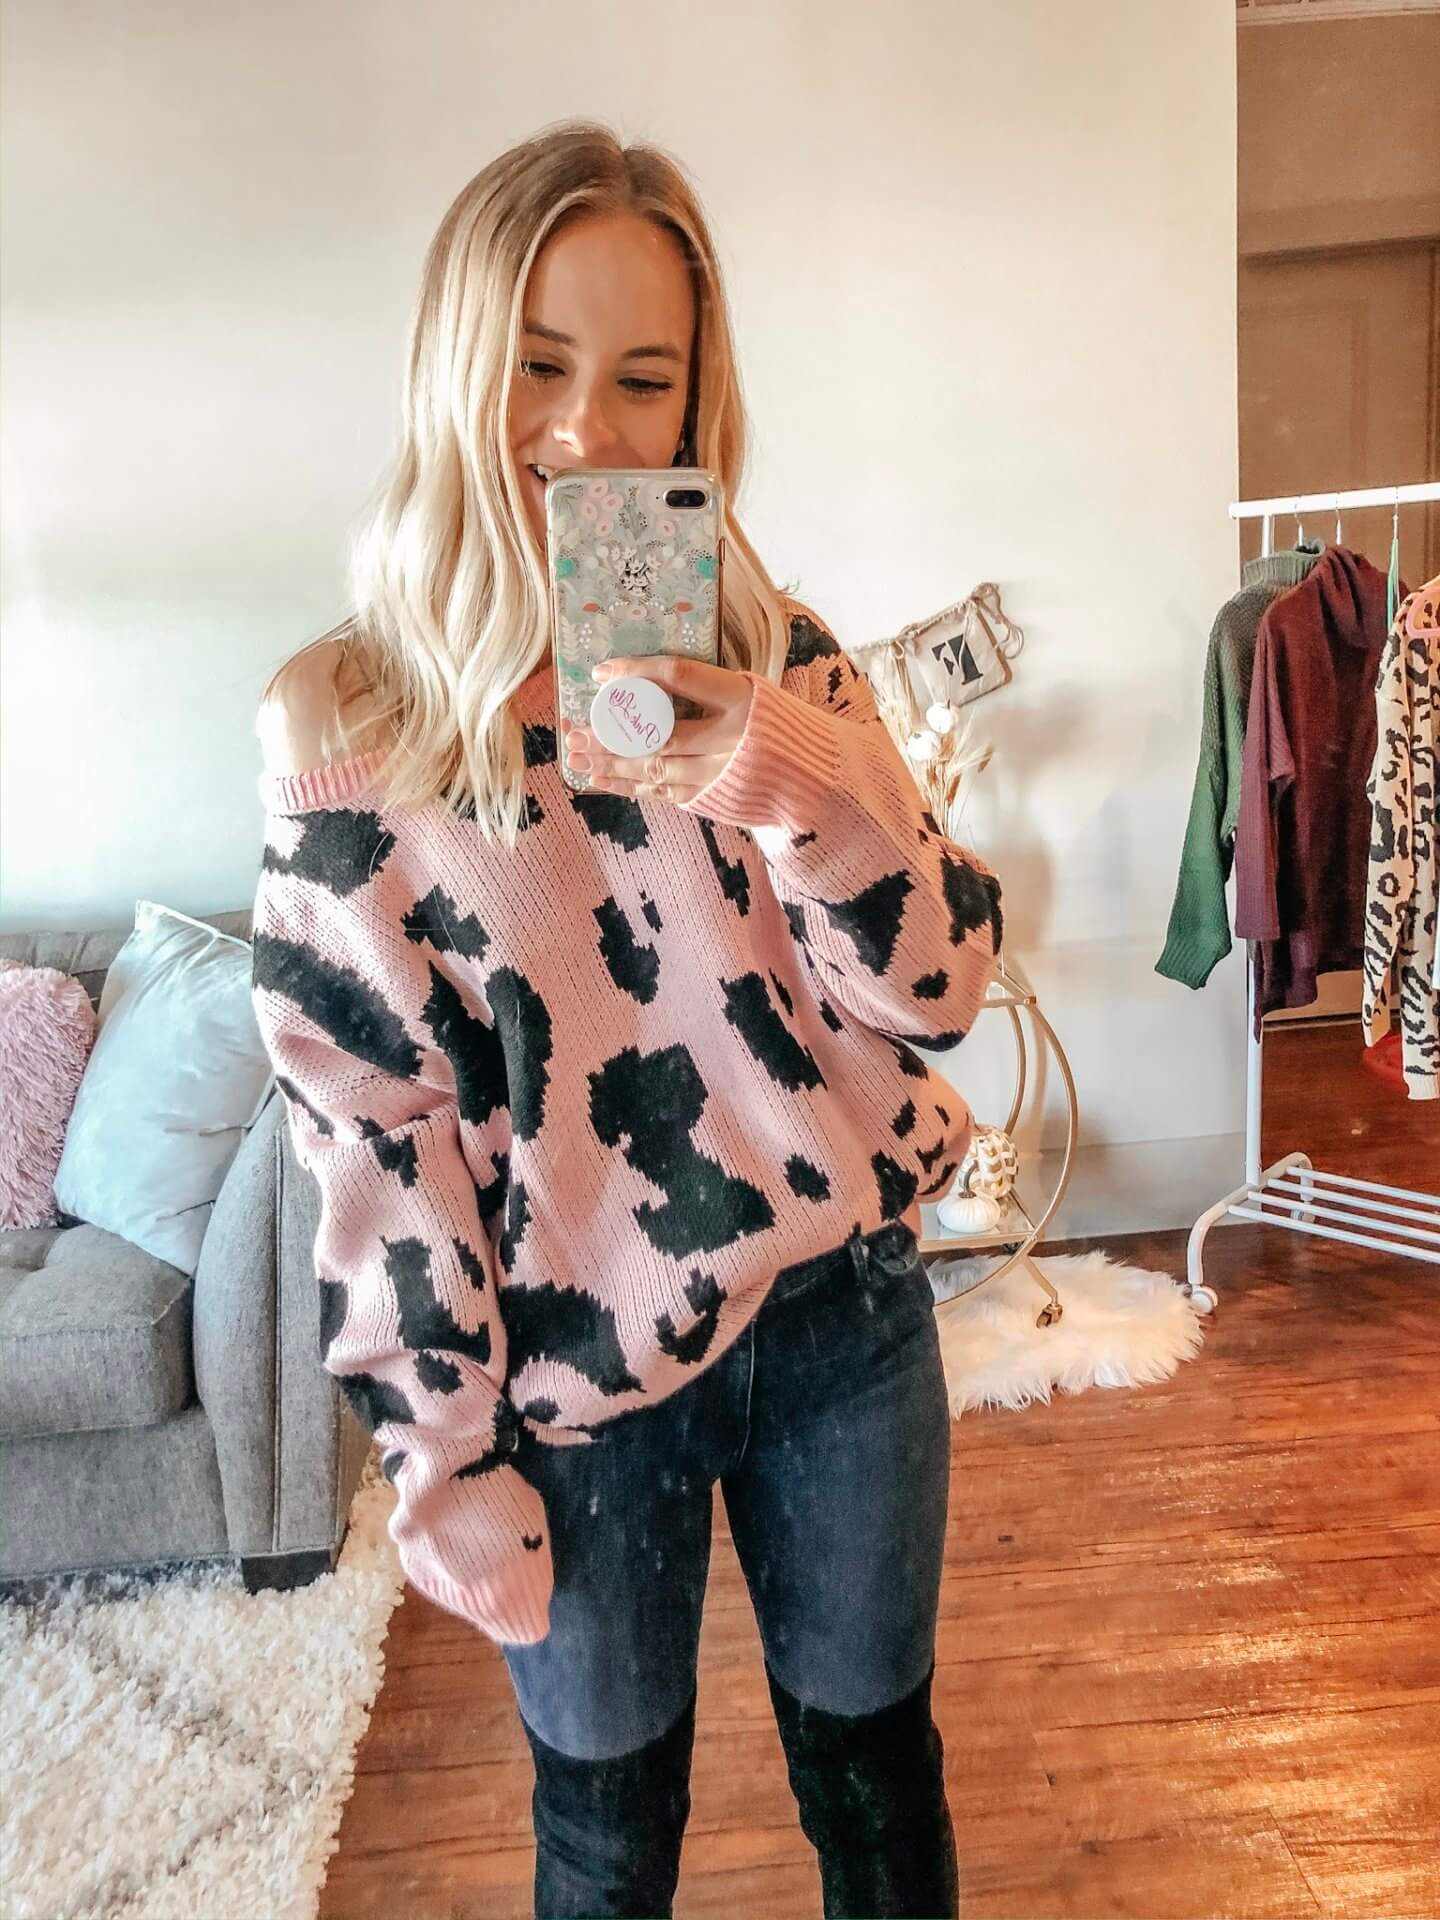 Amazon Sweaters Under $30. Amazon Haul with sweaters under $30. Amazon Fashion Finds. The Blonder Life